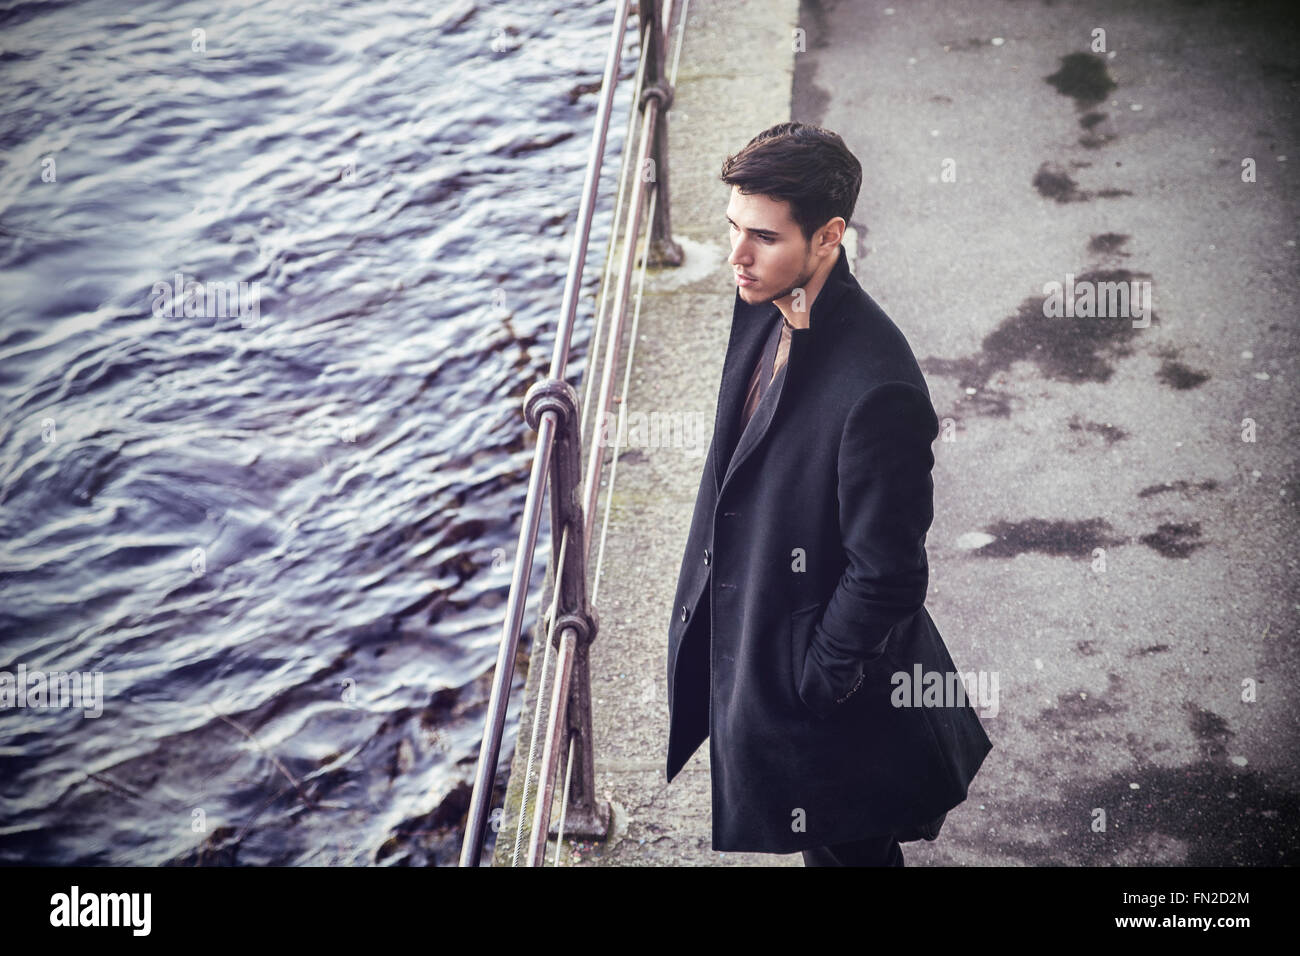 Sad brunet in black clothes looking down while standing near railing outdoors. Stock Photo